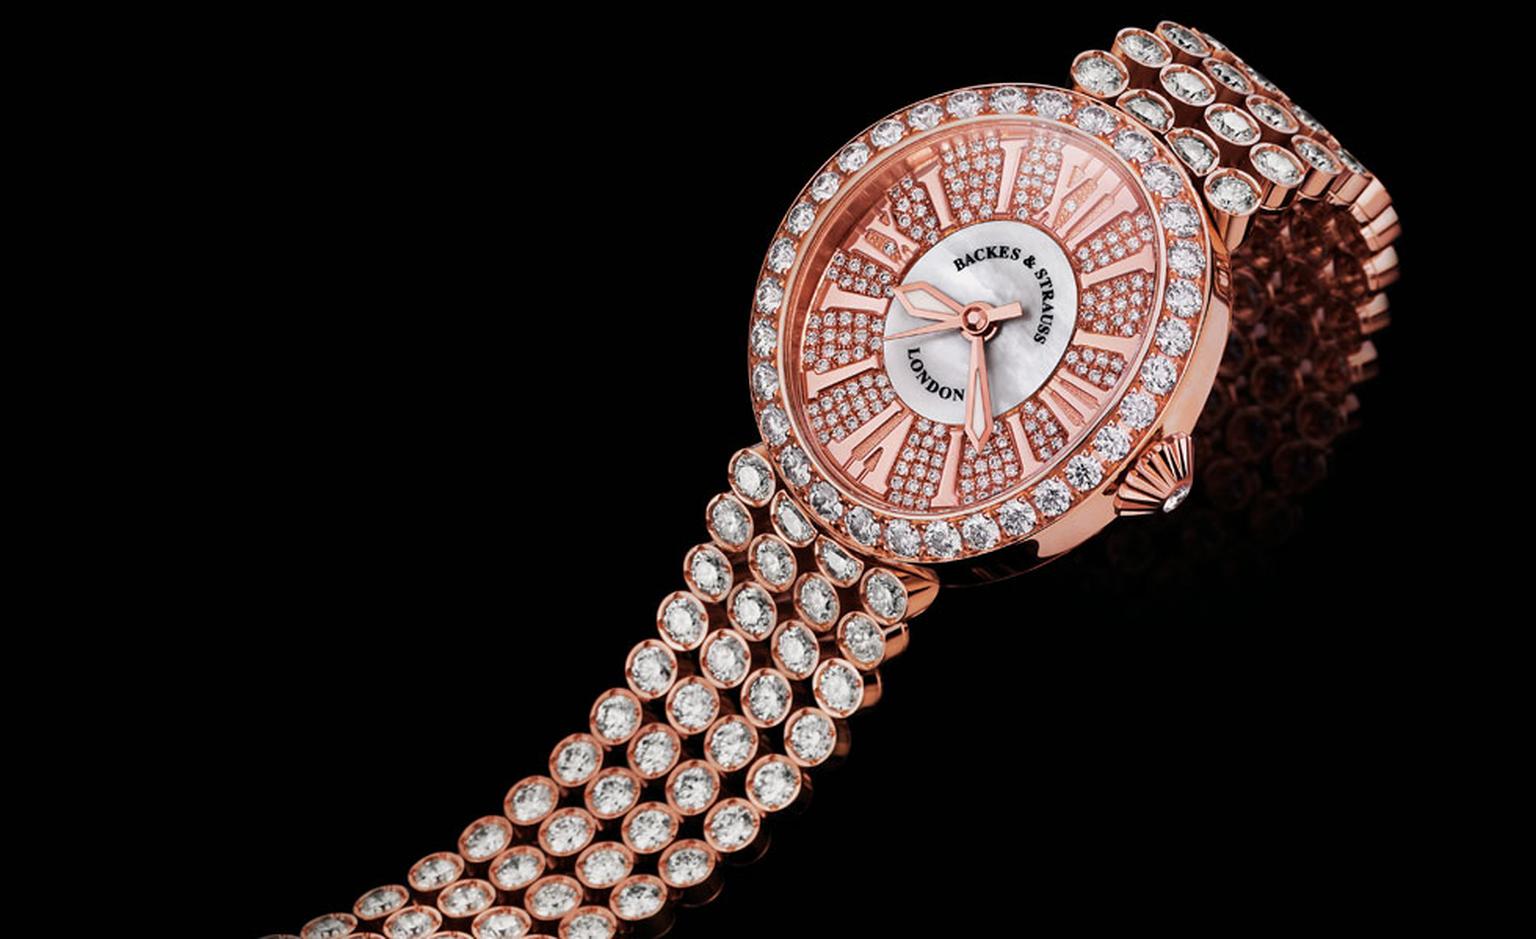 Backes & Strauss Regent Princess in rose gold with 326 ideal-cut diamonds weighing close to23 carats of diamonds in the bracelet and case.